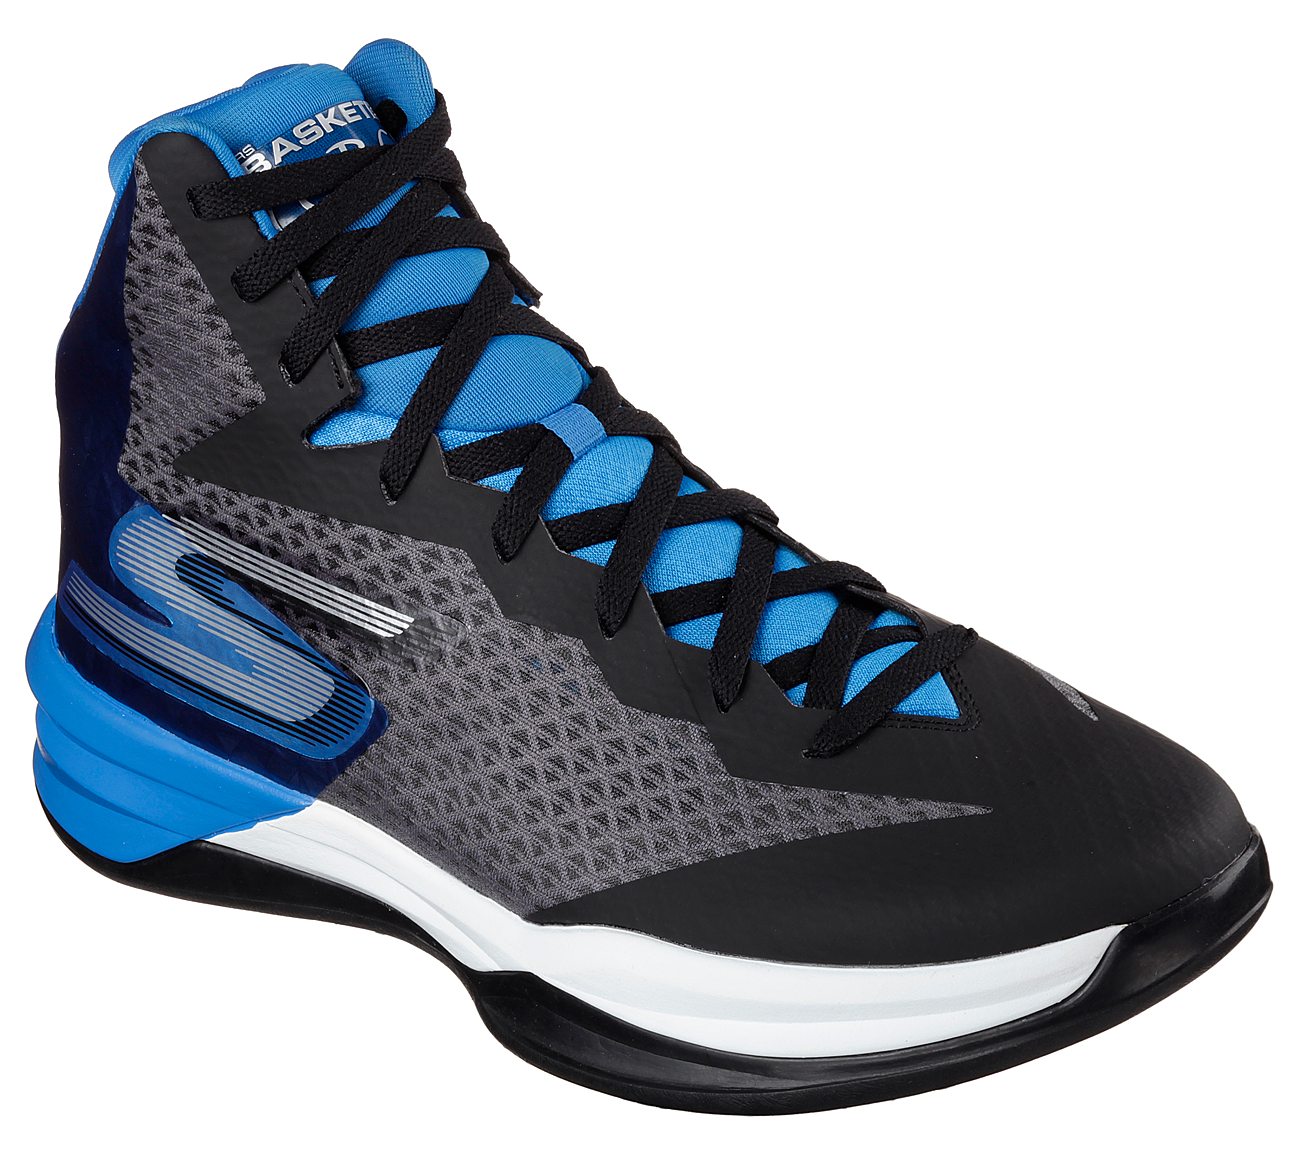 SKECHERS GOTORCH BASKETBALL – The BCode 